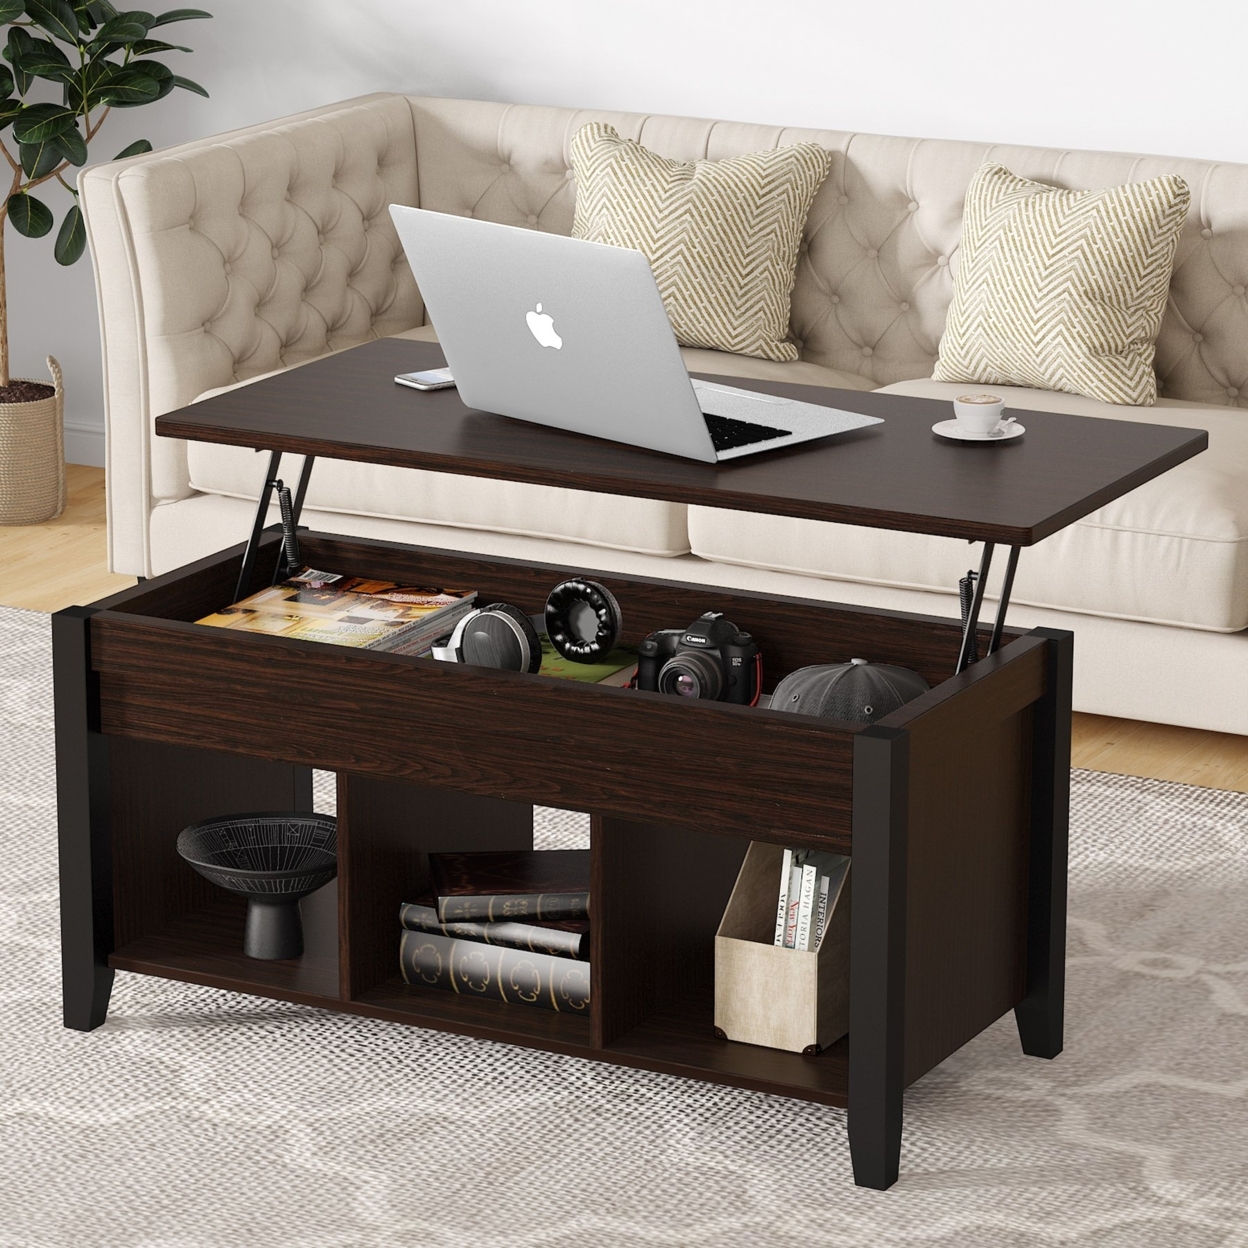 Tribesigns Lift Top Coffee Table With Storage Shelves, Lift Up Center Table - Light Black